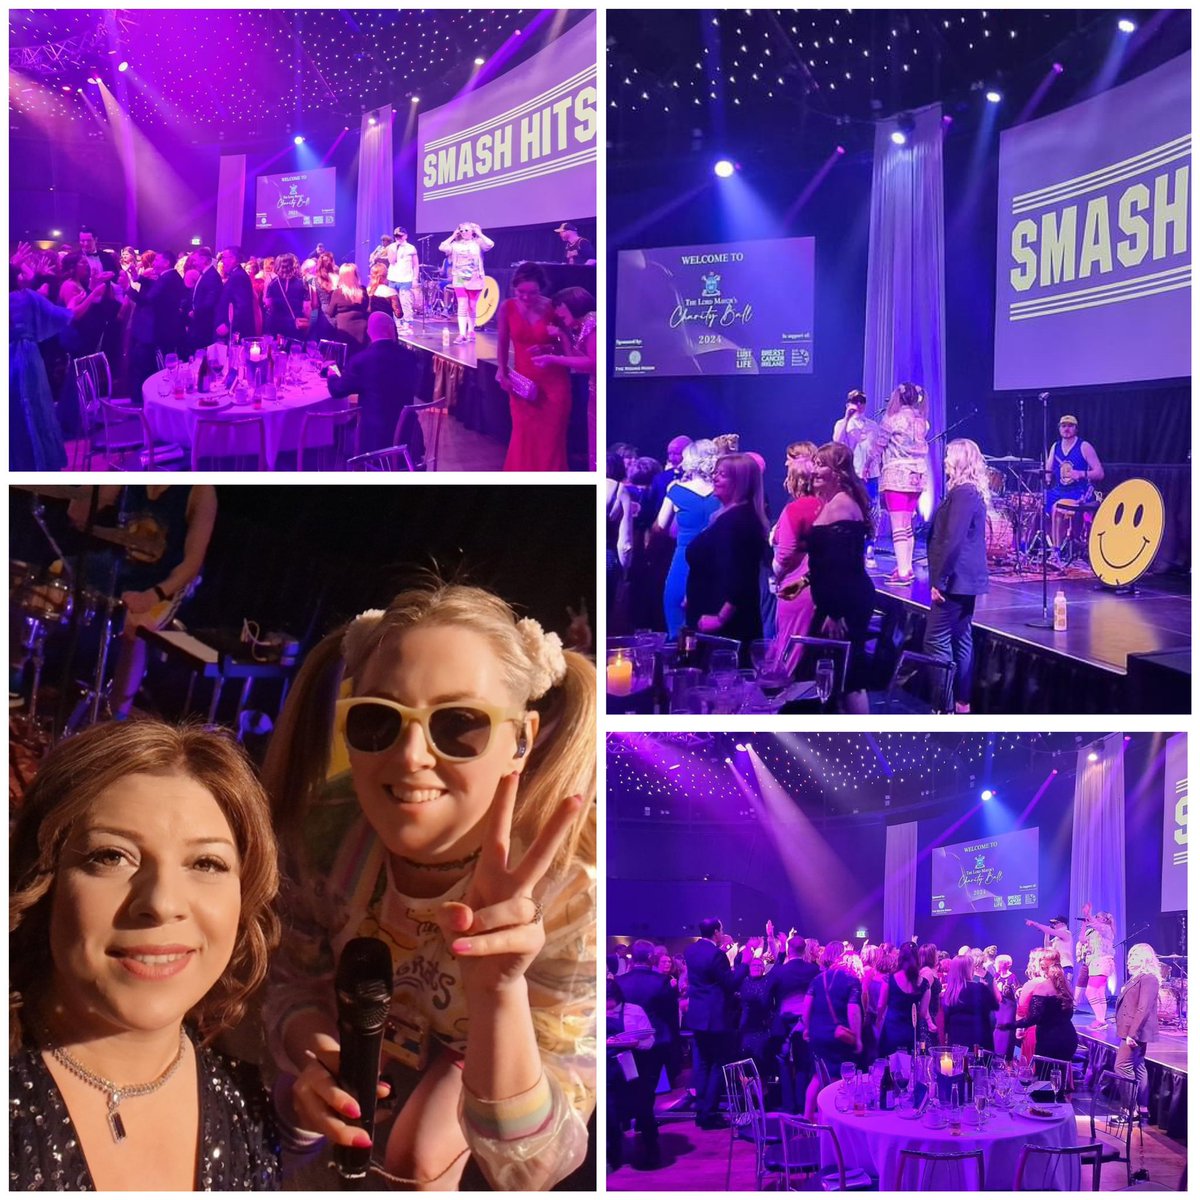 We'll Never Forget the 2024 Lord Mayor of Dublin Charity Ball at the Mansion House - y'all absolutely Smashed It

#SmashHits #SmashedIt #LordMayor #MansionHouse #EPIC #charityball @RoundRoomDublin